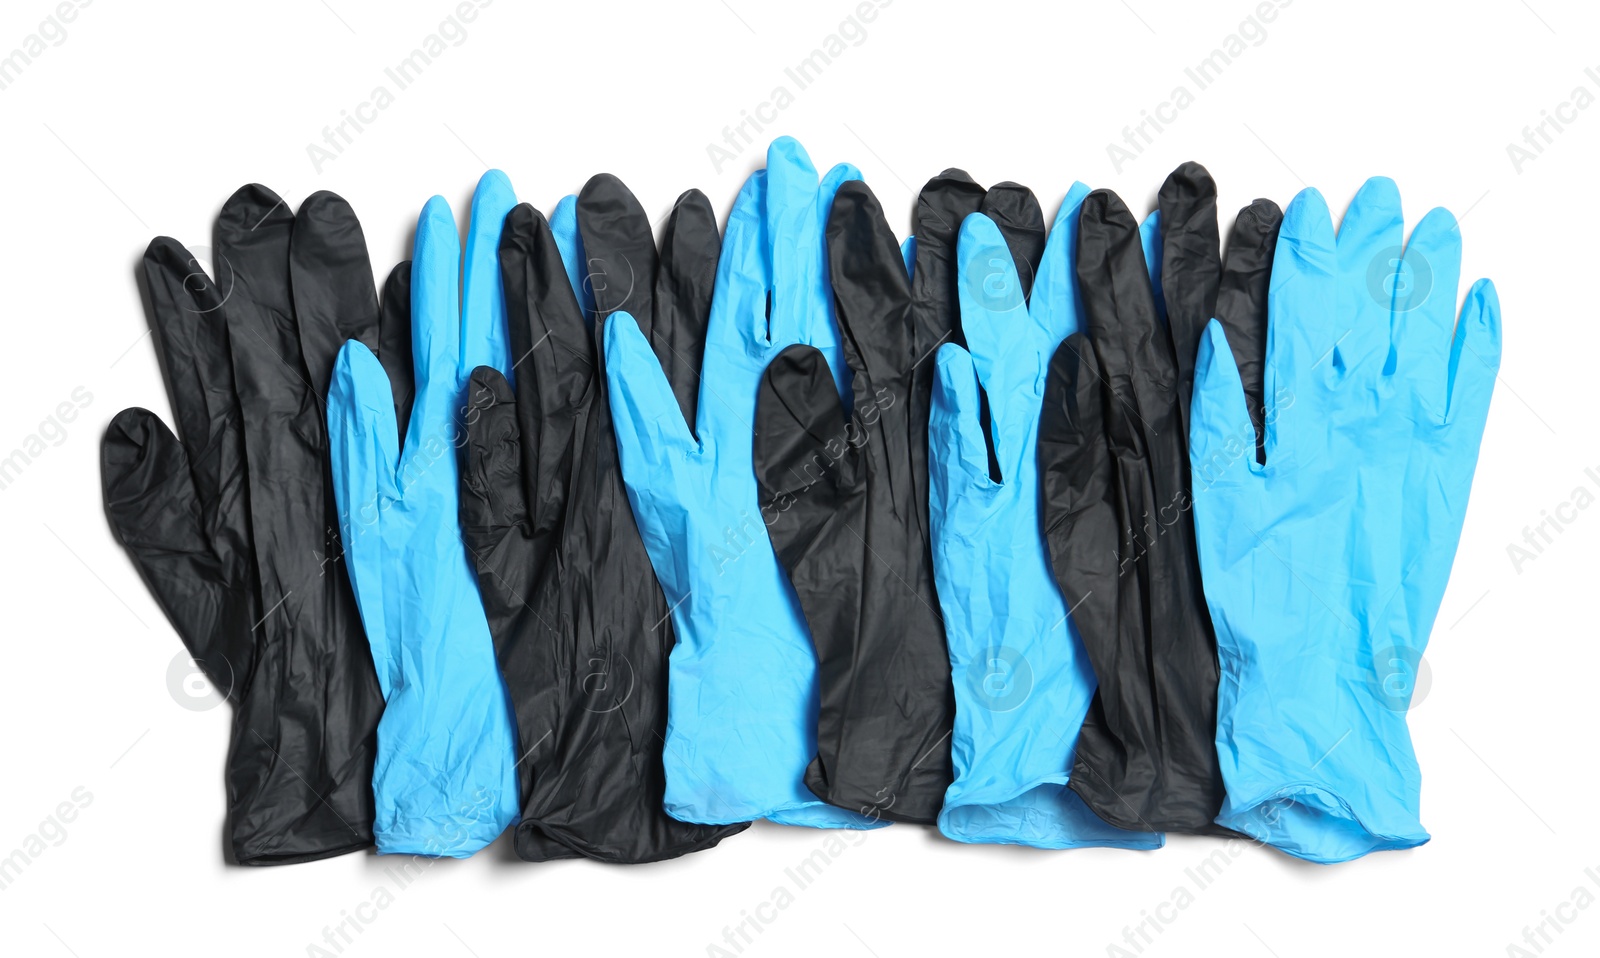 Photo of Different medical gloves on white background, top view